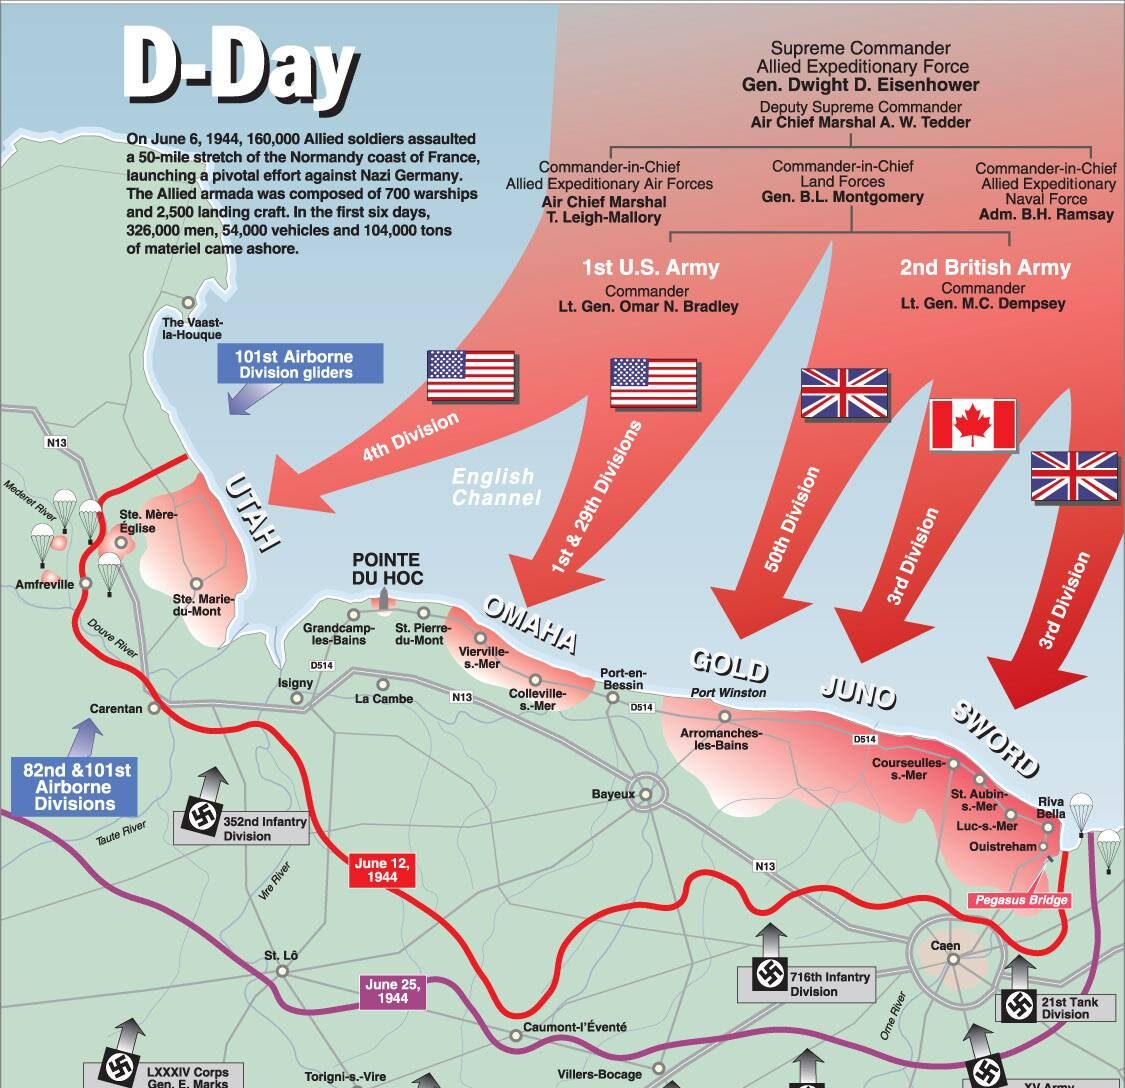 Remembering 79 Years Since Operation Overlord and the Normandy Invasion